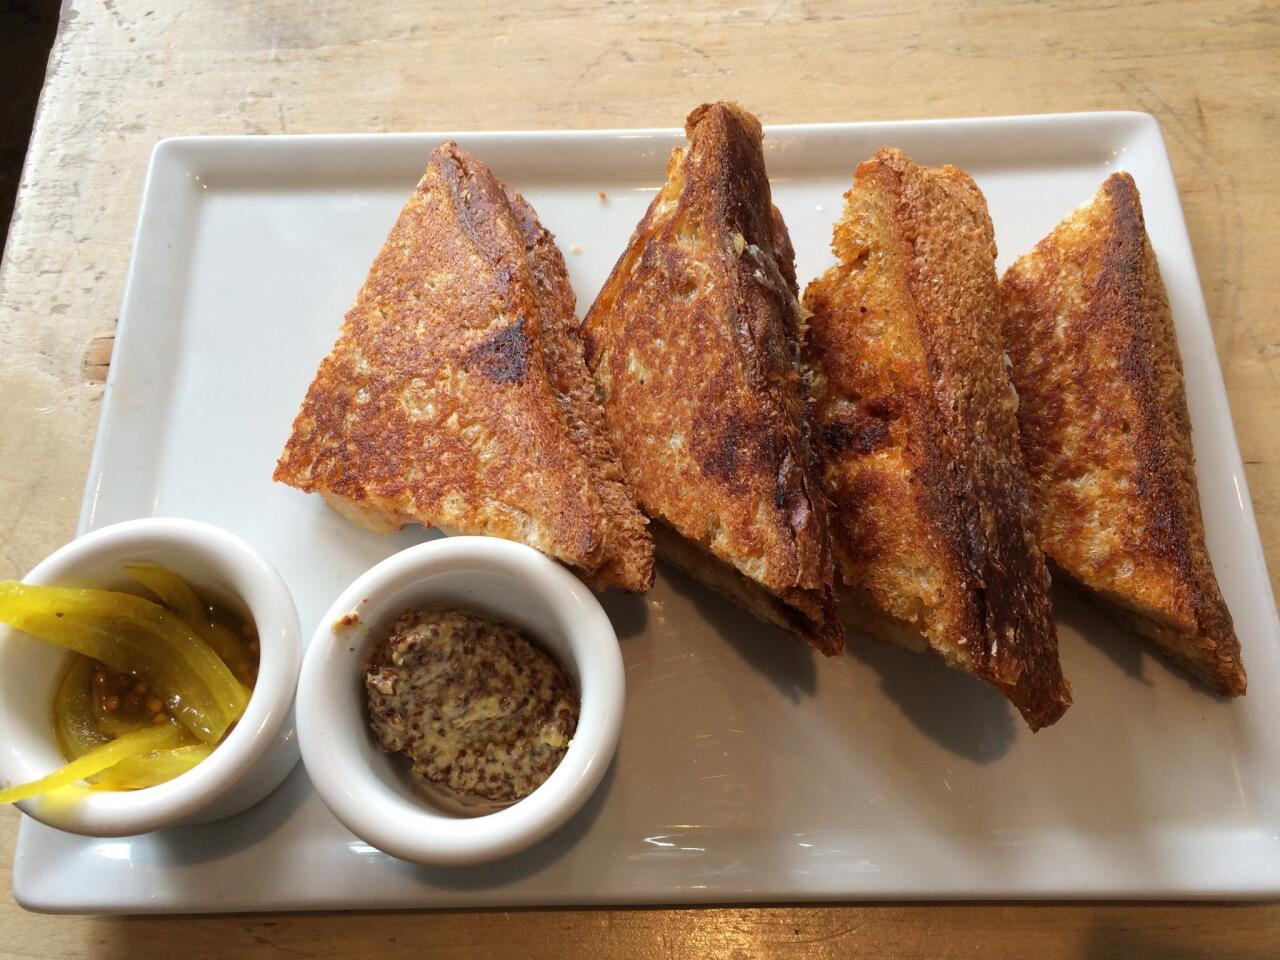 Go Get 'Em Tiger also serves breakfast and lunch, including this grilled cheese sandwich made with Hook's two-year cheddar. Read more: 11 places for food lovers in Larchmont Village